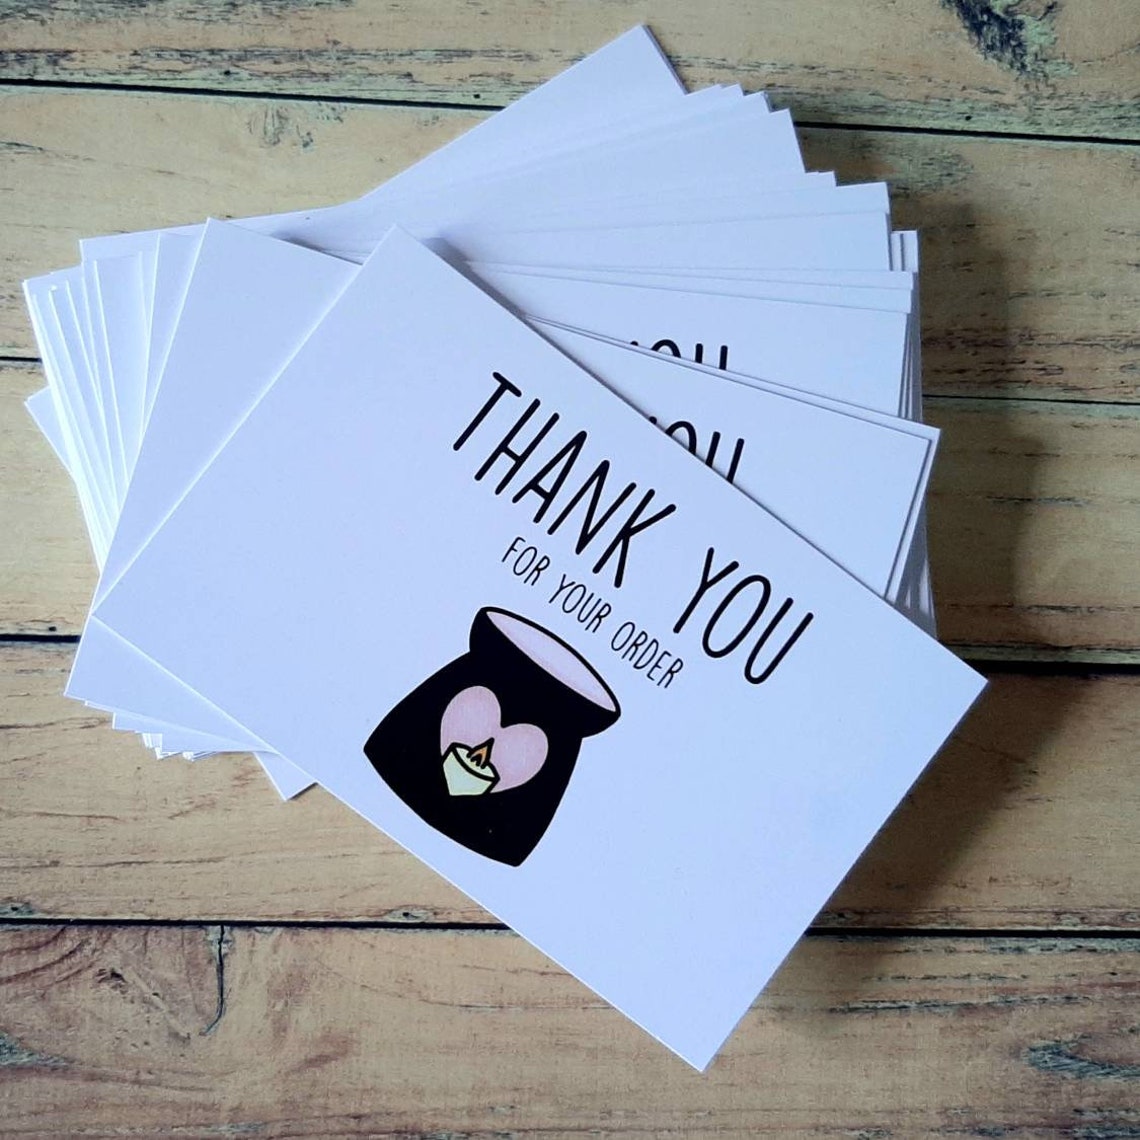 Thank you for your order wax melt burner business cards